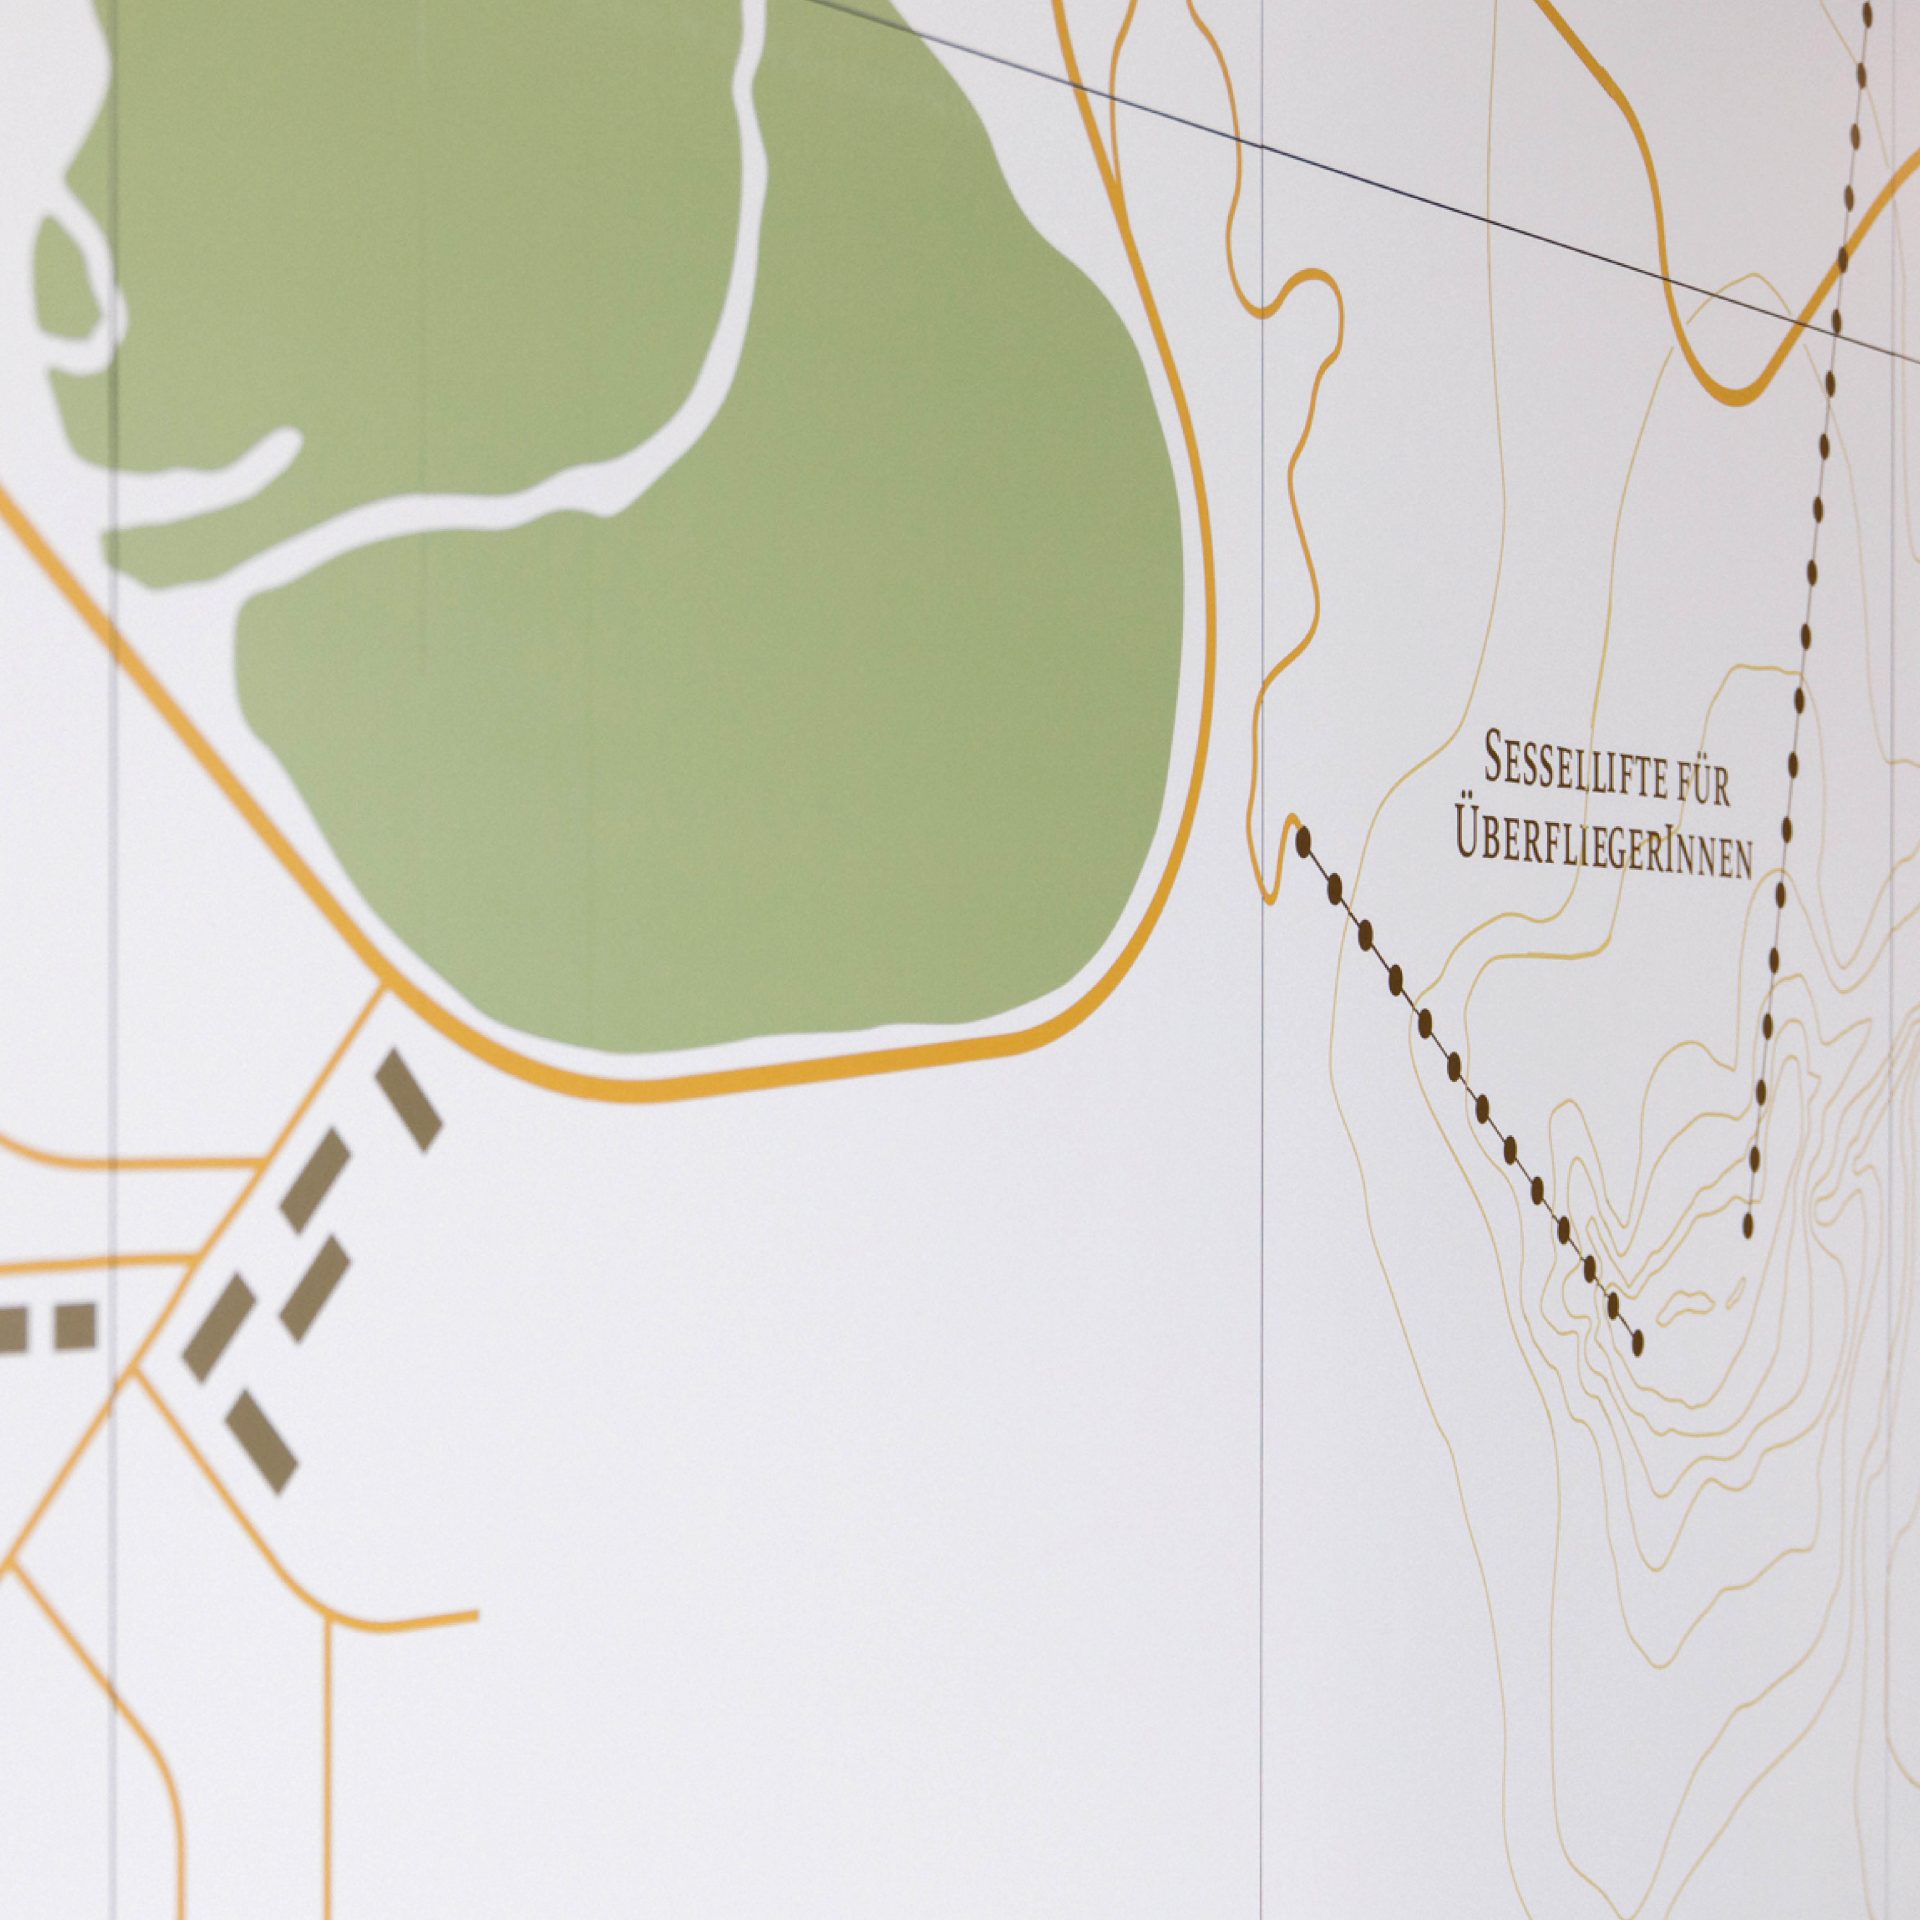 Detail illustration and text to symbolize the high achiever chairlift